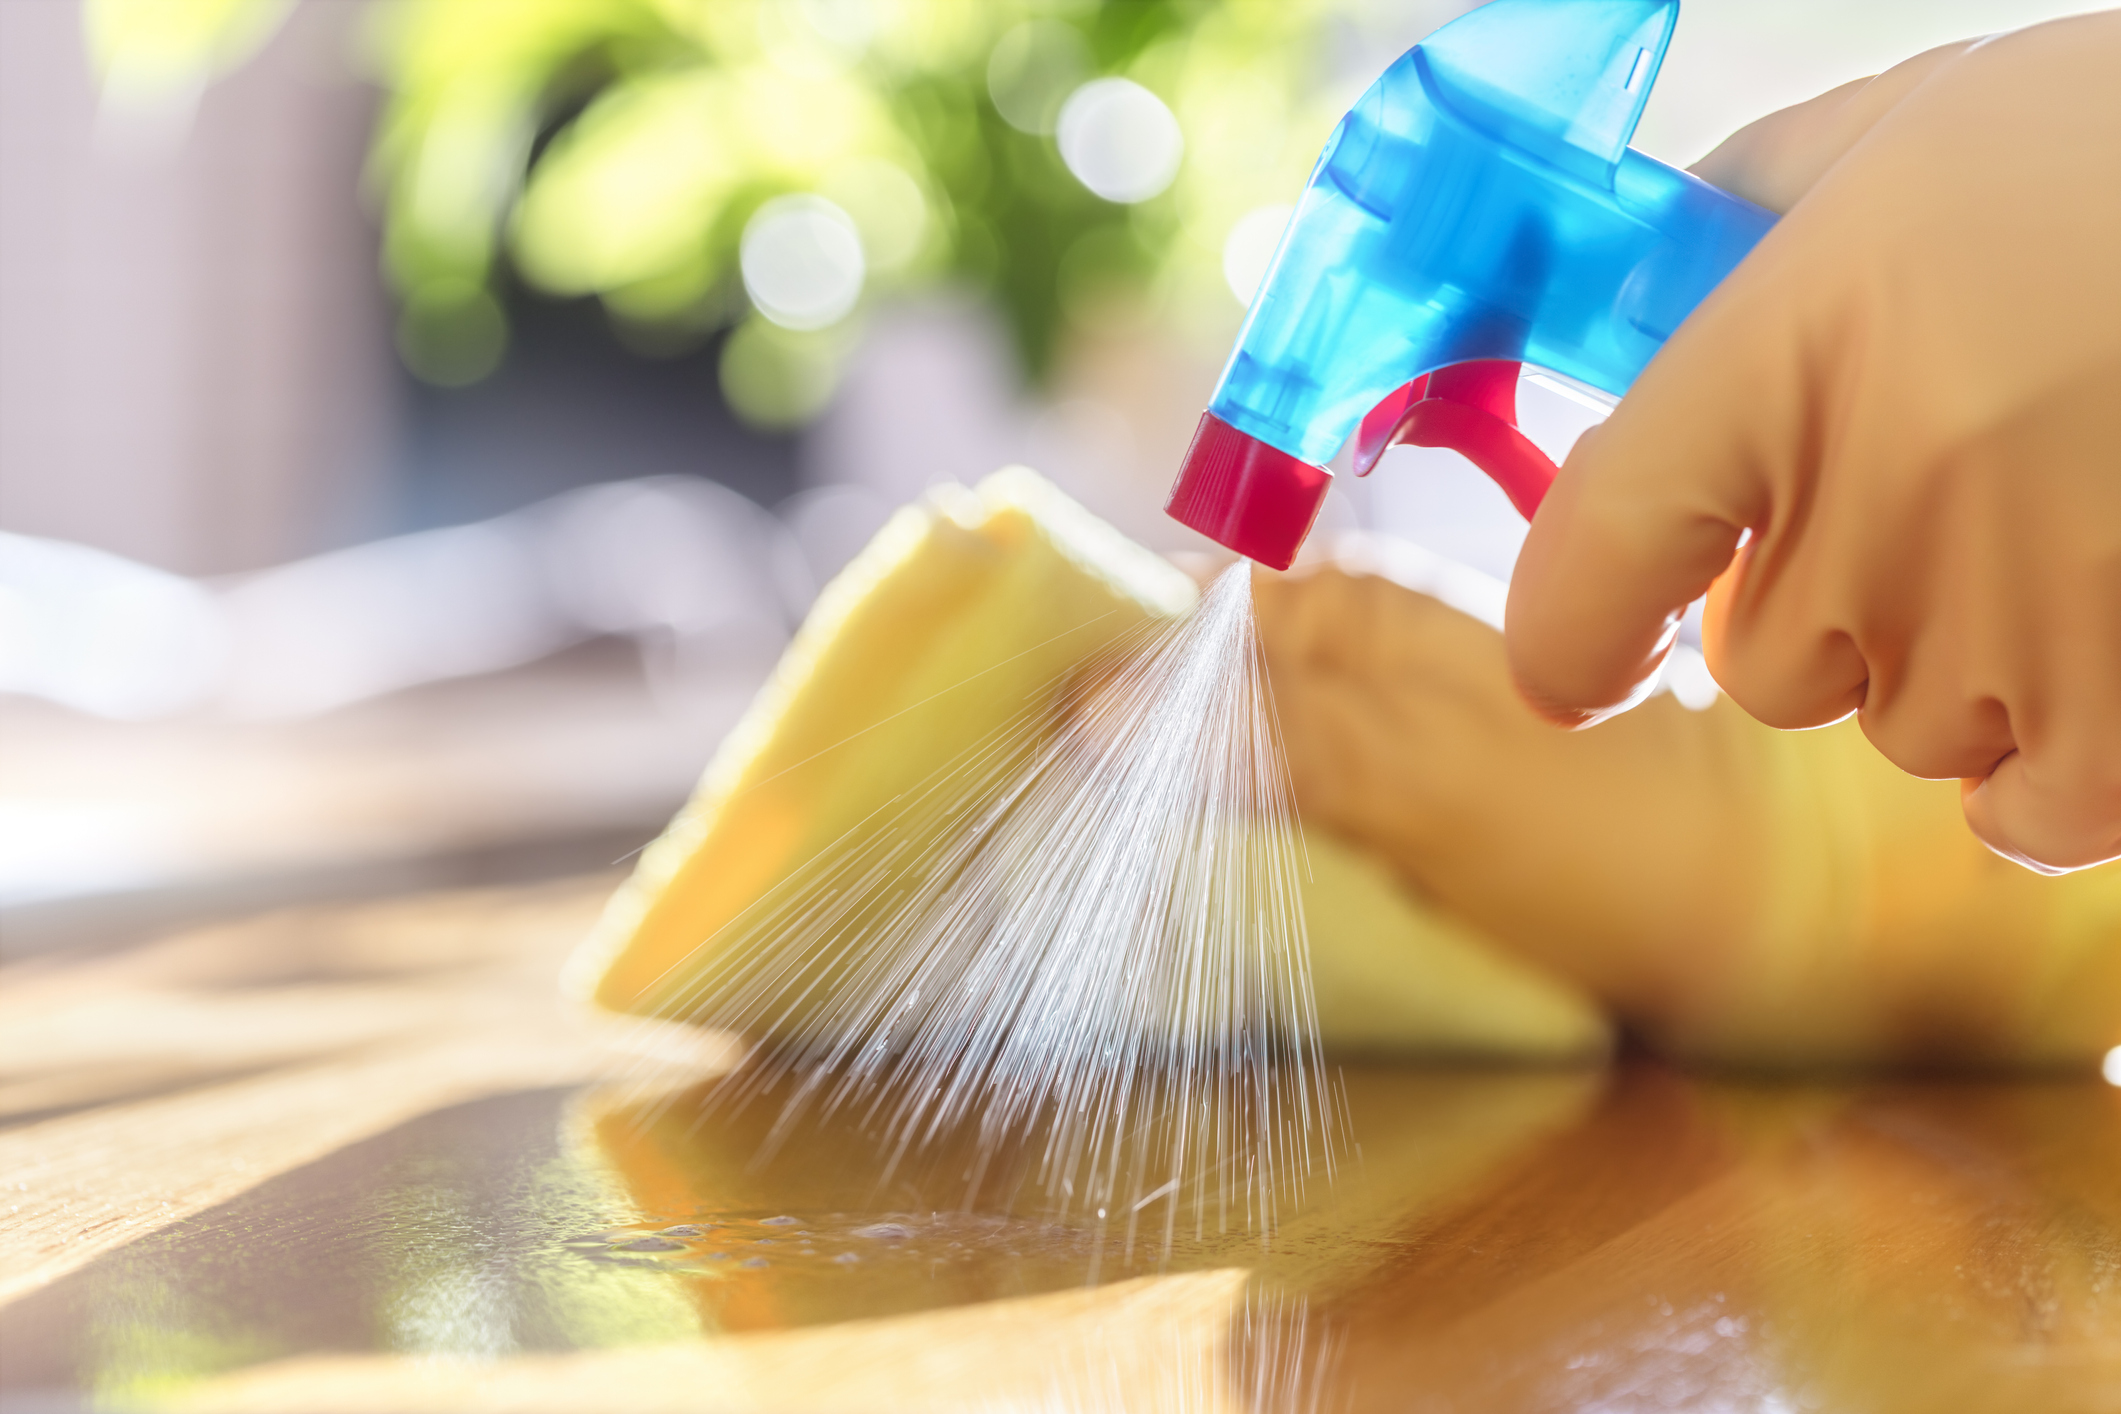 Toxicologists Discover Popular Cleaning Products Can Increase